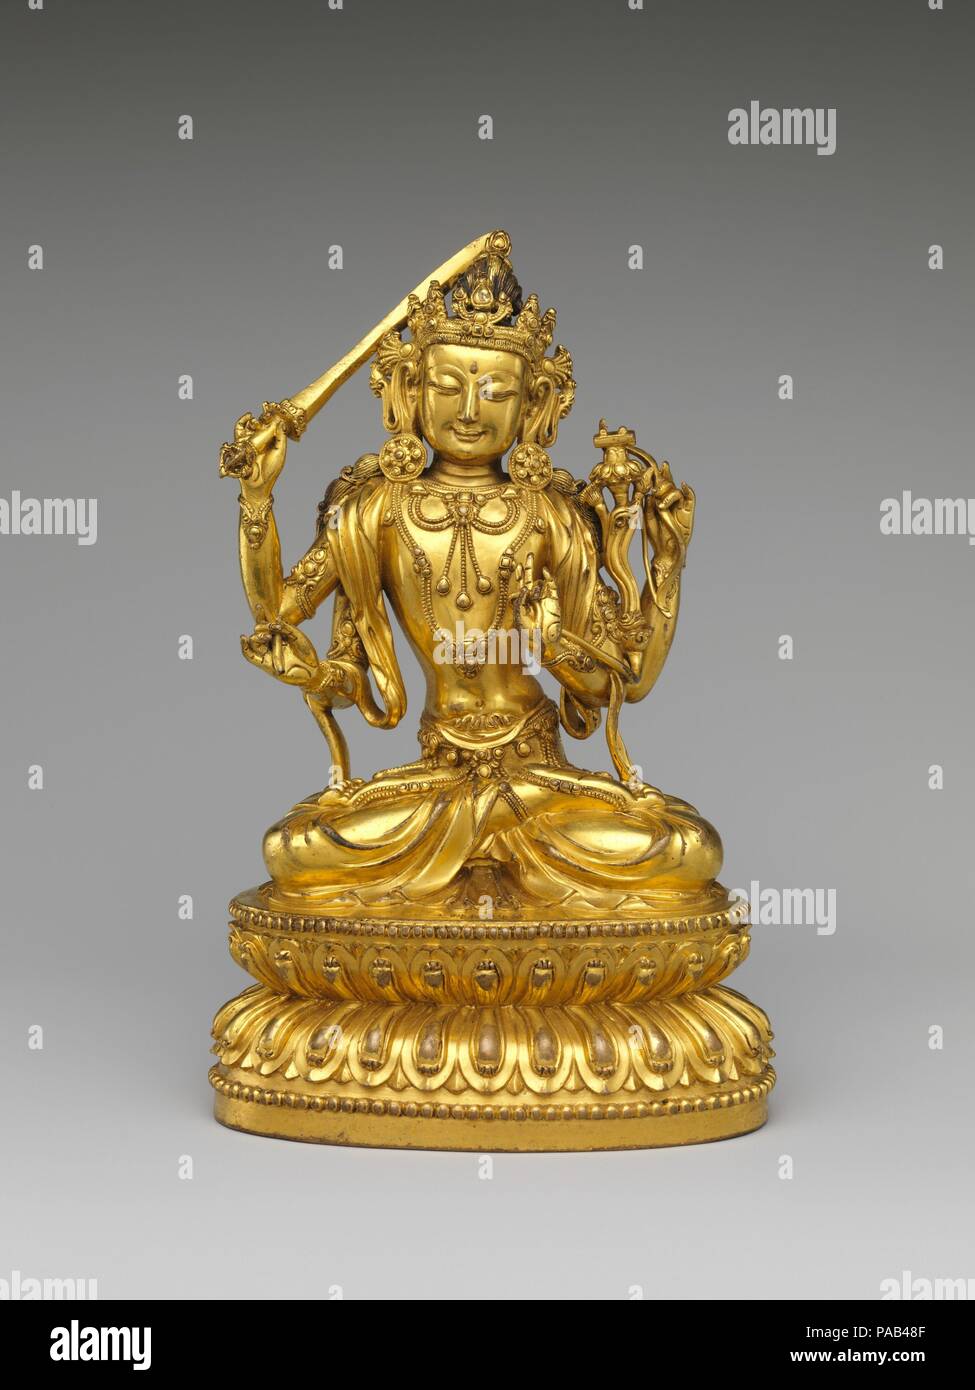 Bodhisattva Manjushri as Tikshna-Manjushri (Minjie Wenshu). Culture: China. Dimensions: H. 7 1/2 in. (19.1 cm); W. 4 3/4 in. (12.1 cm); D. 3 1/2 in. (8.9 cm).  Manjushri holds a sword in his primary right hand and a volume of the Perfection of Wisdom Sutra (which rests on a small lotus) in his left. Remnants of a bow and arrow can be seen in his secondary hands, and the combination of the four implements identify the sculpture as a Tikshna- Manjushri, a manifestation that refers to the bodhisattva's quick wit while further elucidating his position as an embodiment of spiritual wisdom.   The in Stock Photo